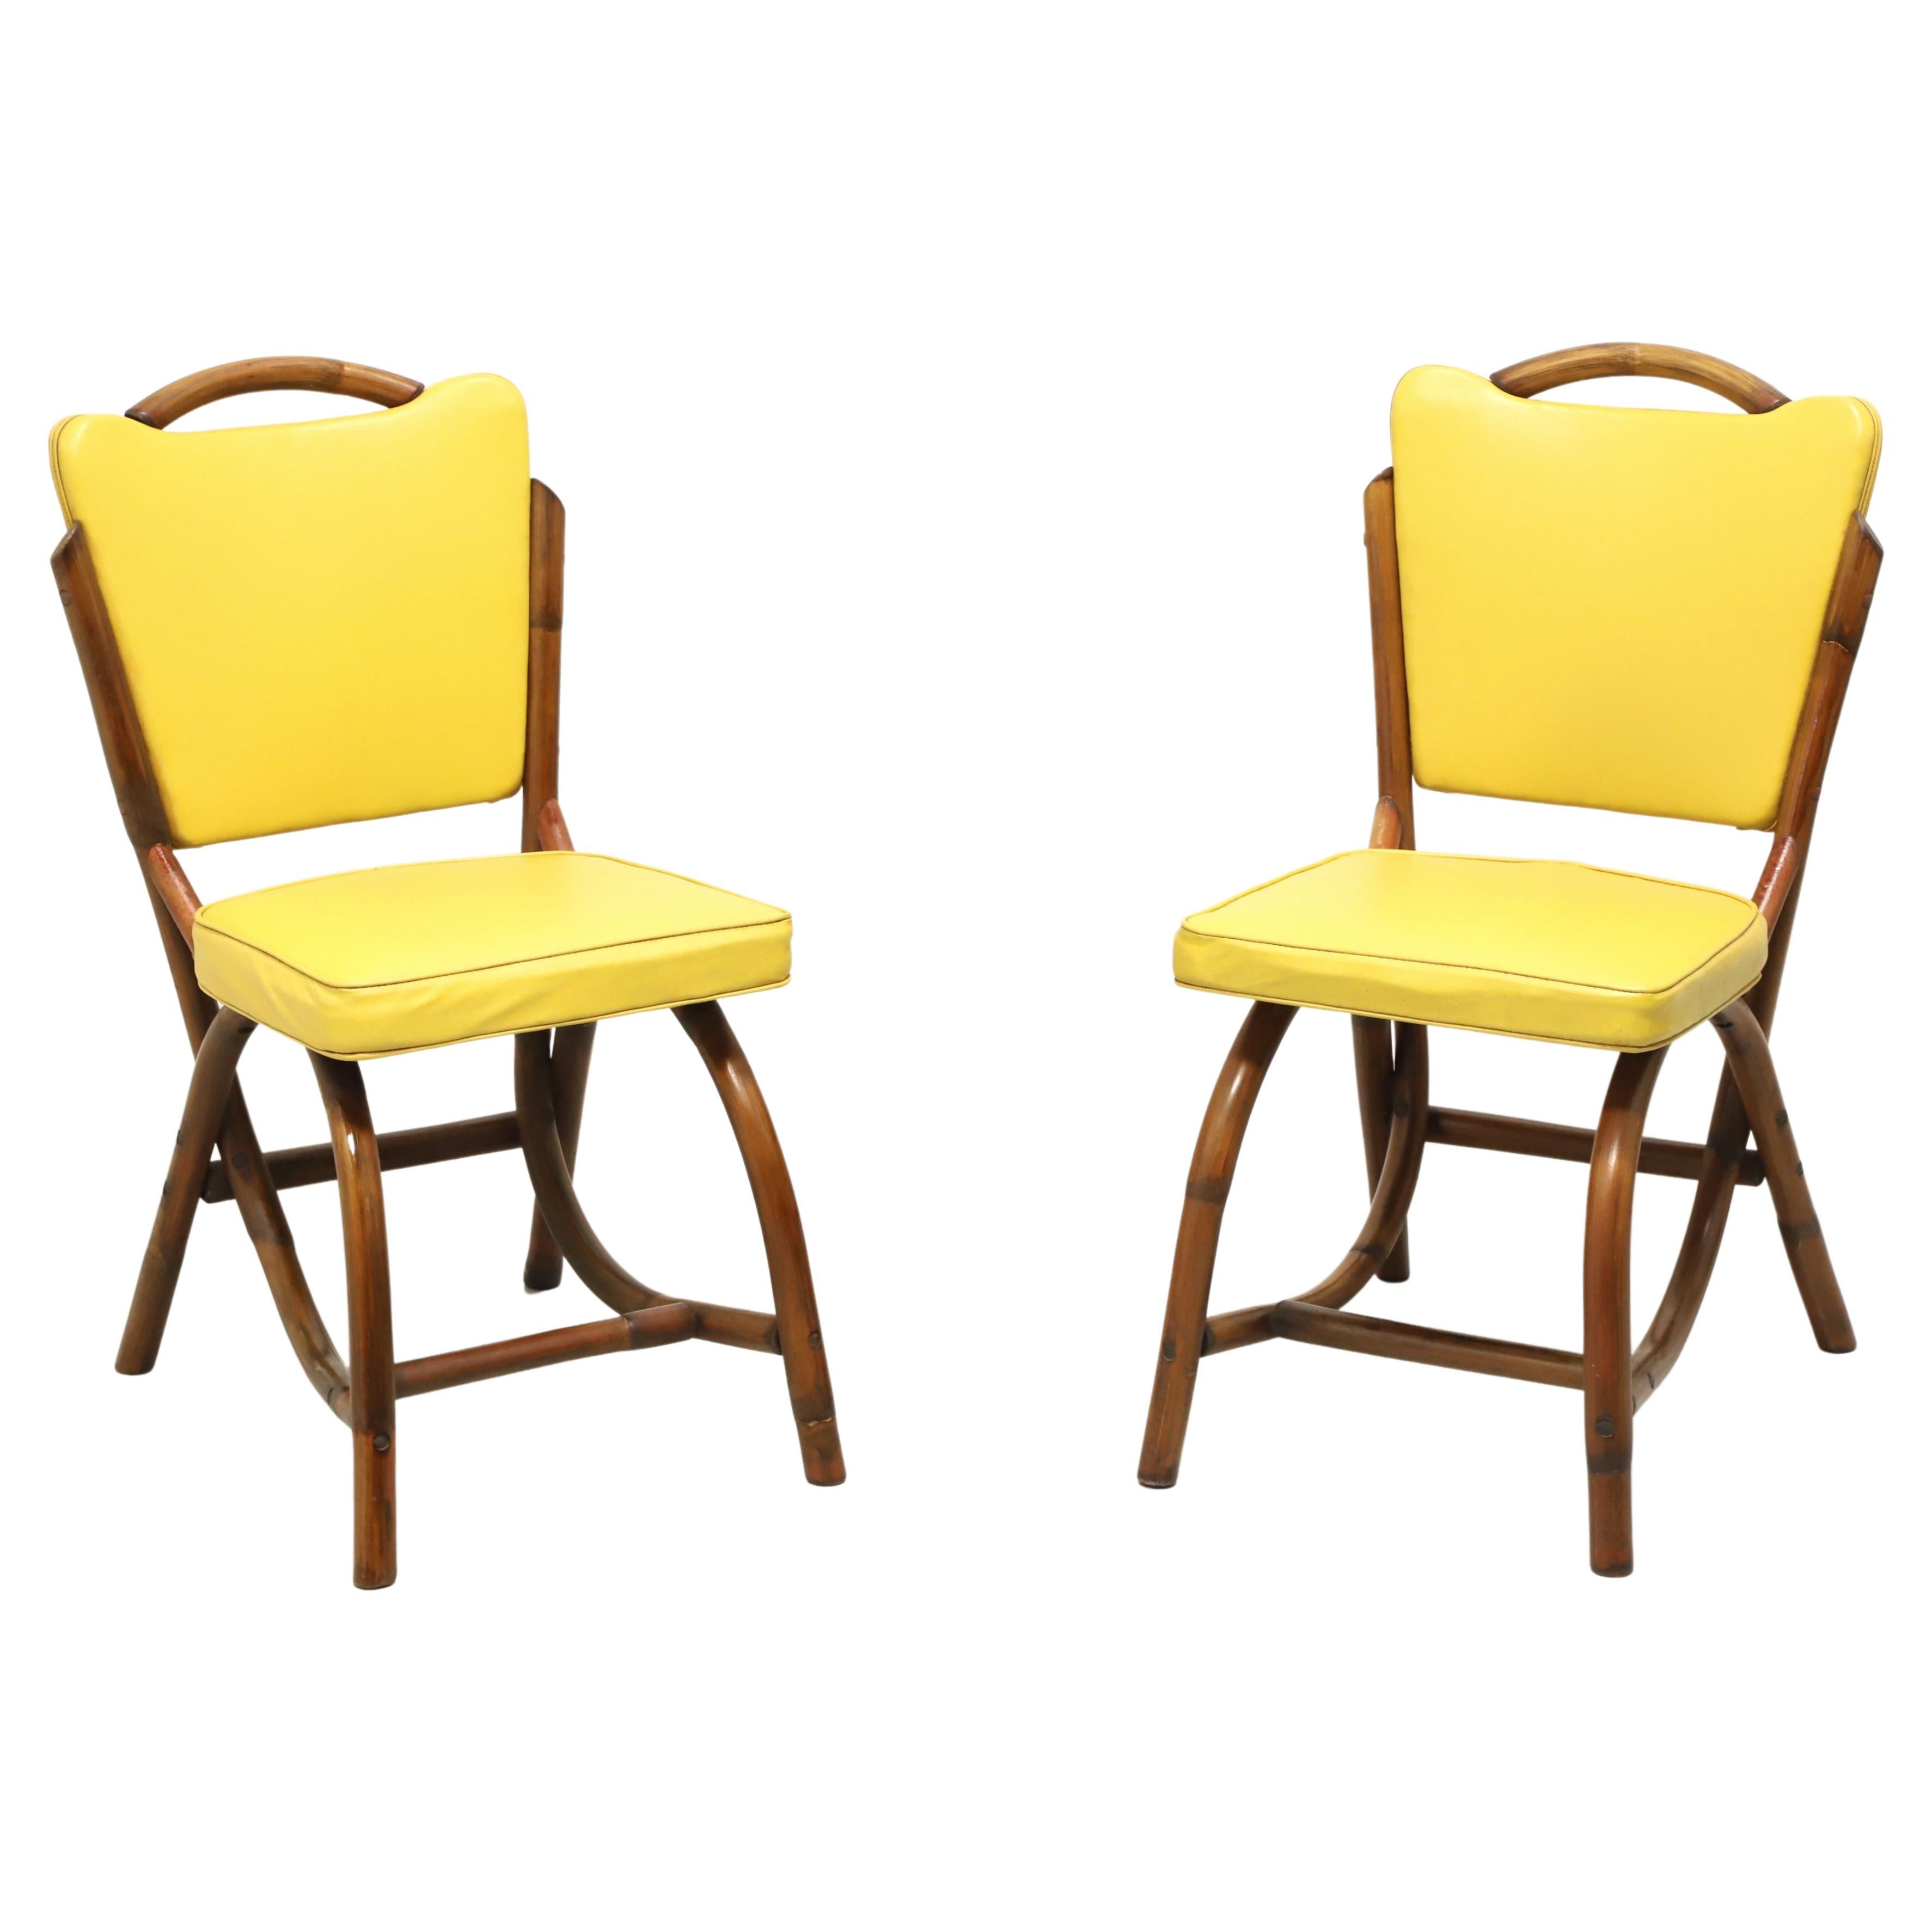 BAM-TAN 1960's Rattan Dining Side Chairs - Pair A